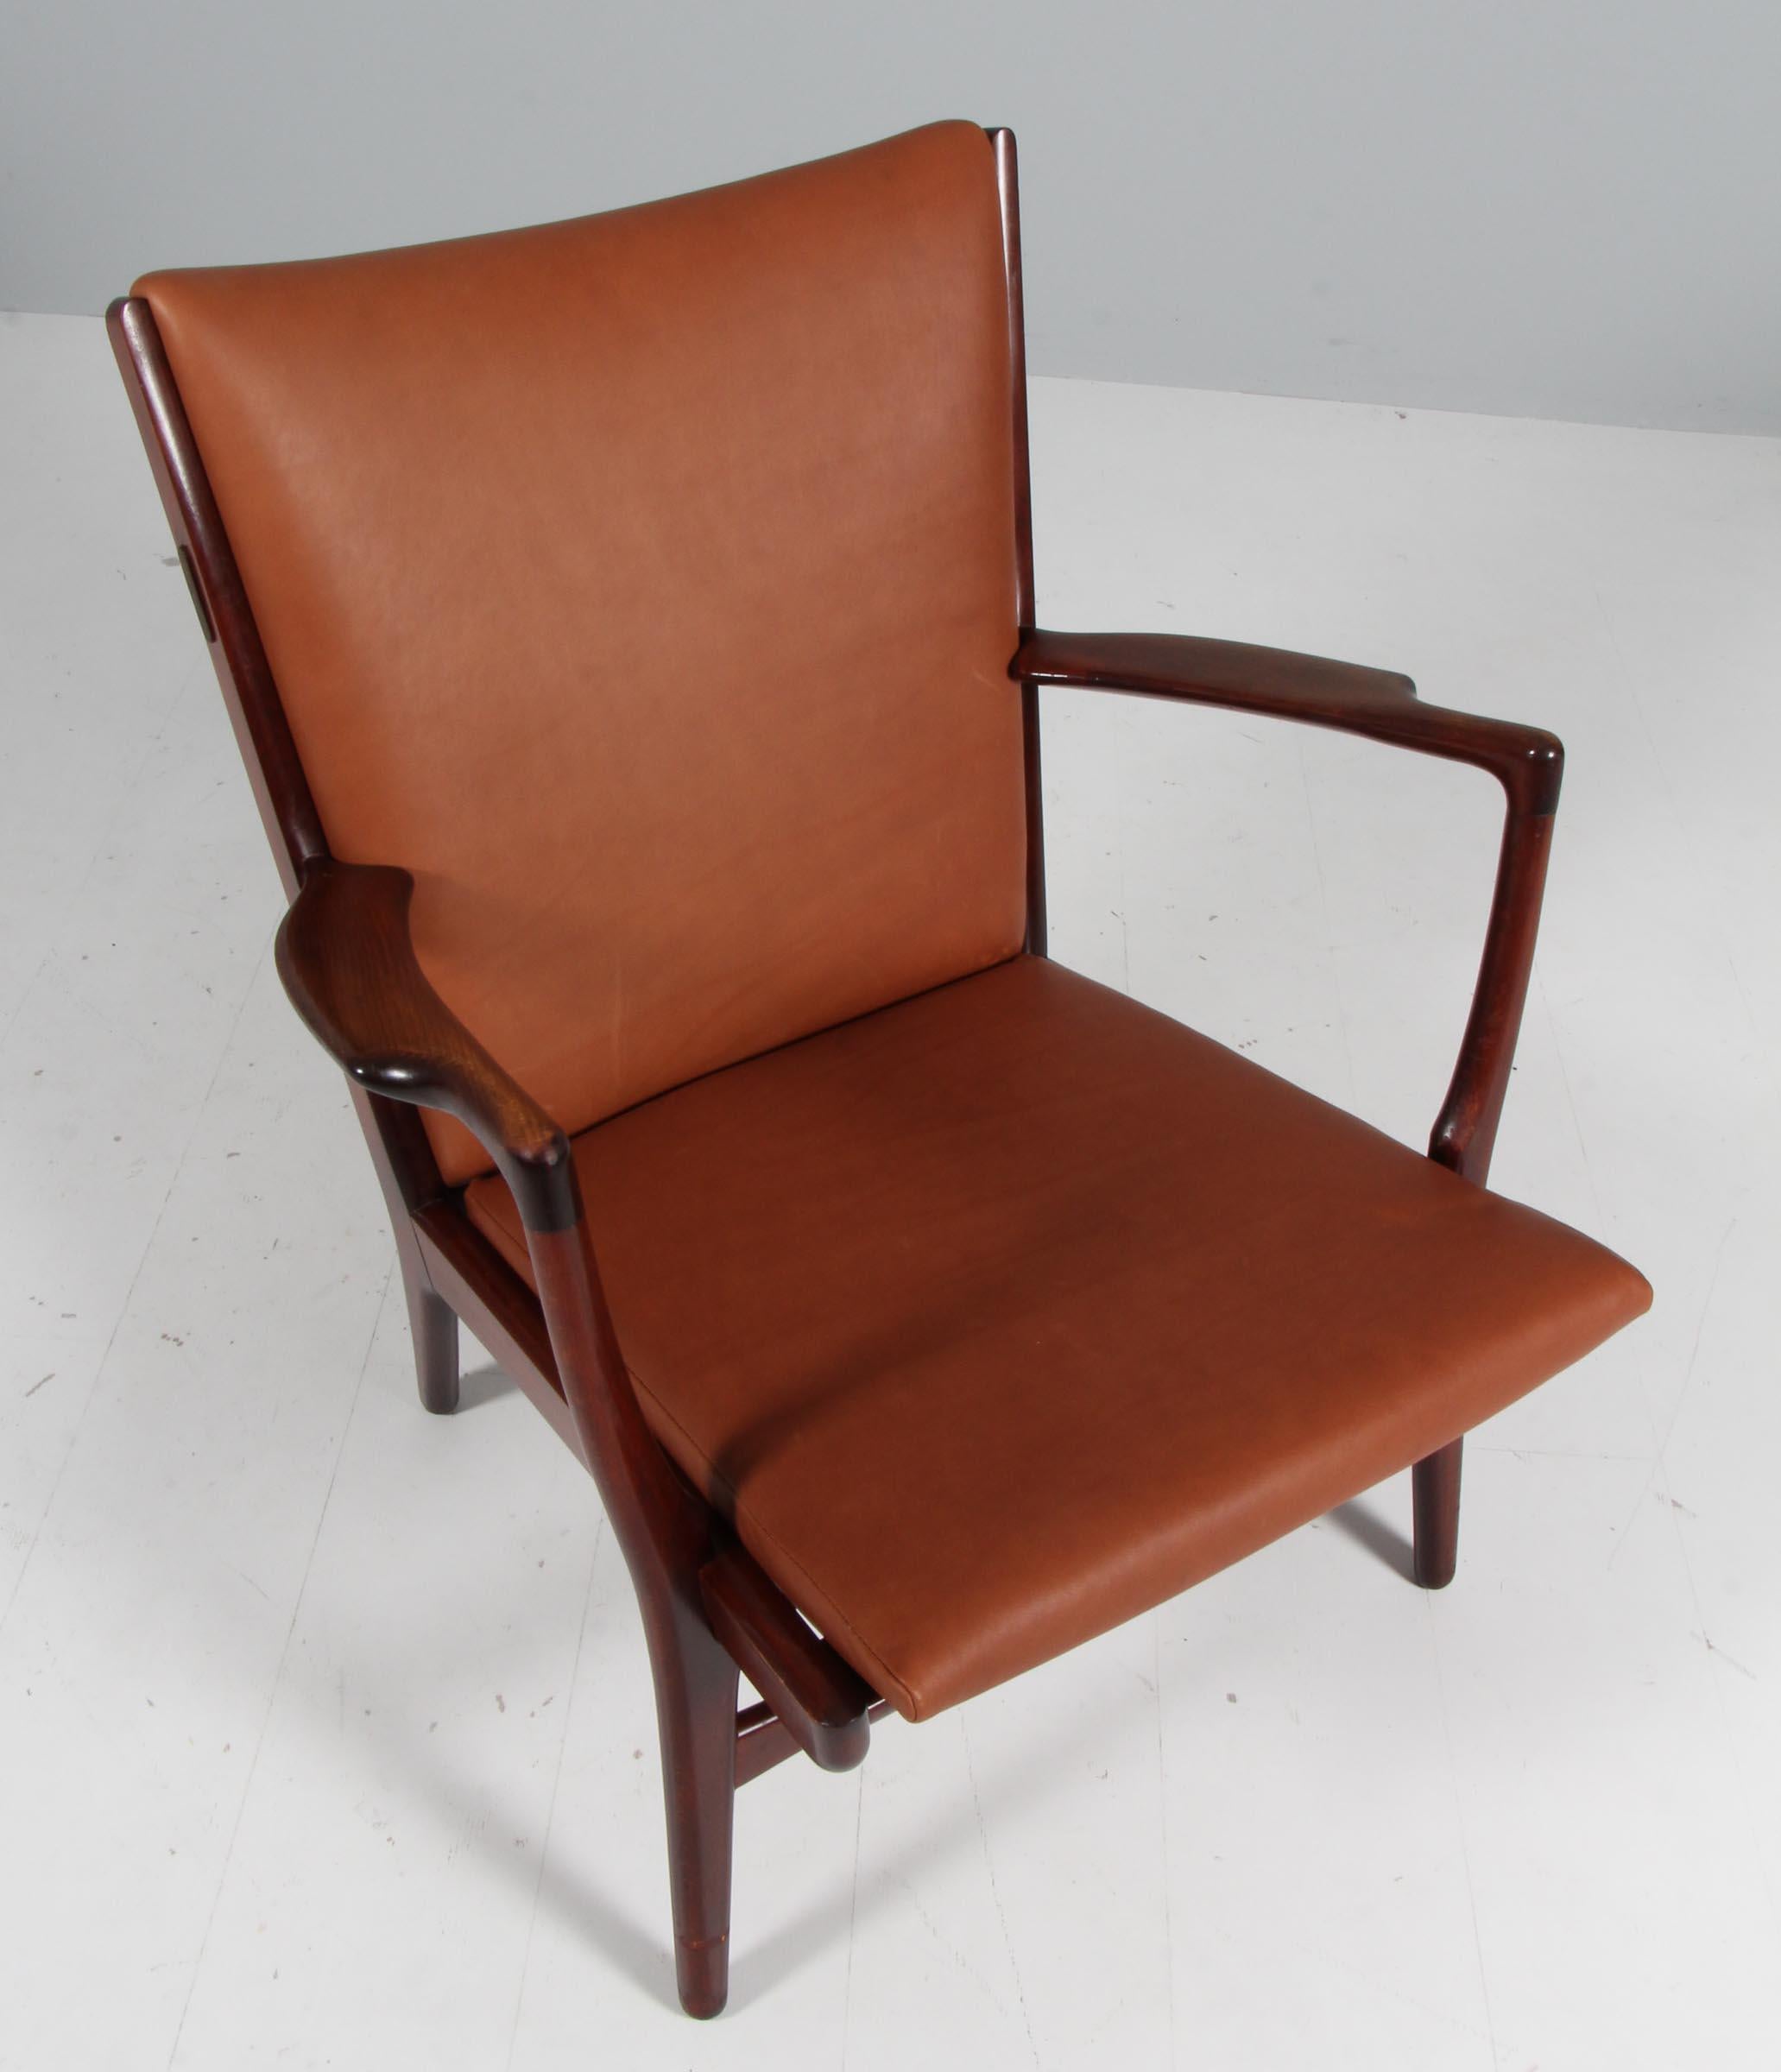 Designed by Hans Wegner in 1951 and produced by A.P. Stolen, this sturdy armchair, model AP16, features an beech frame with a broad curved back and carved armrests. New upholstered with full grain aniline leather